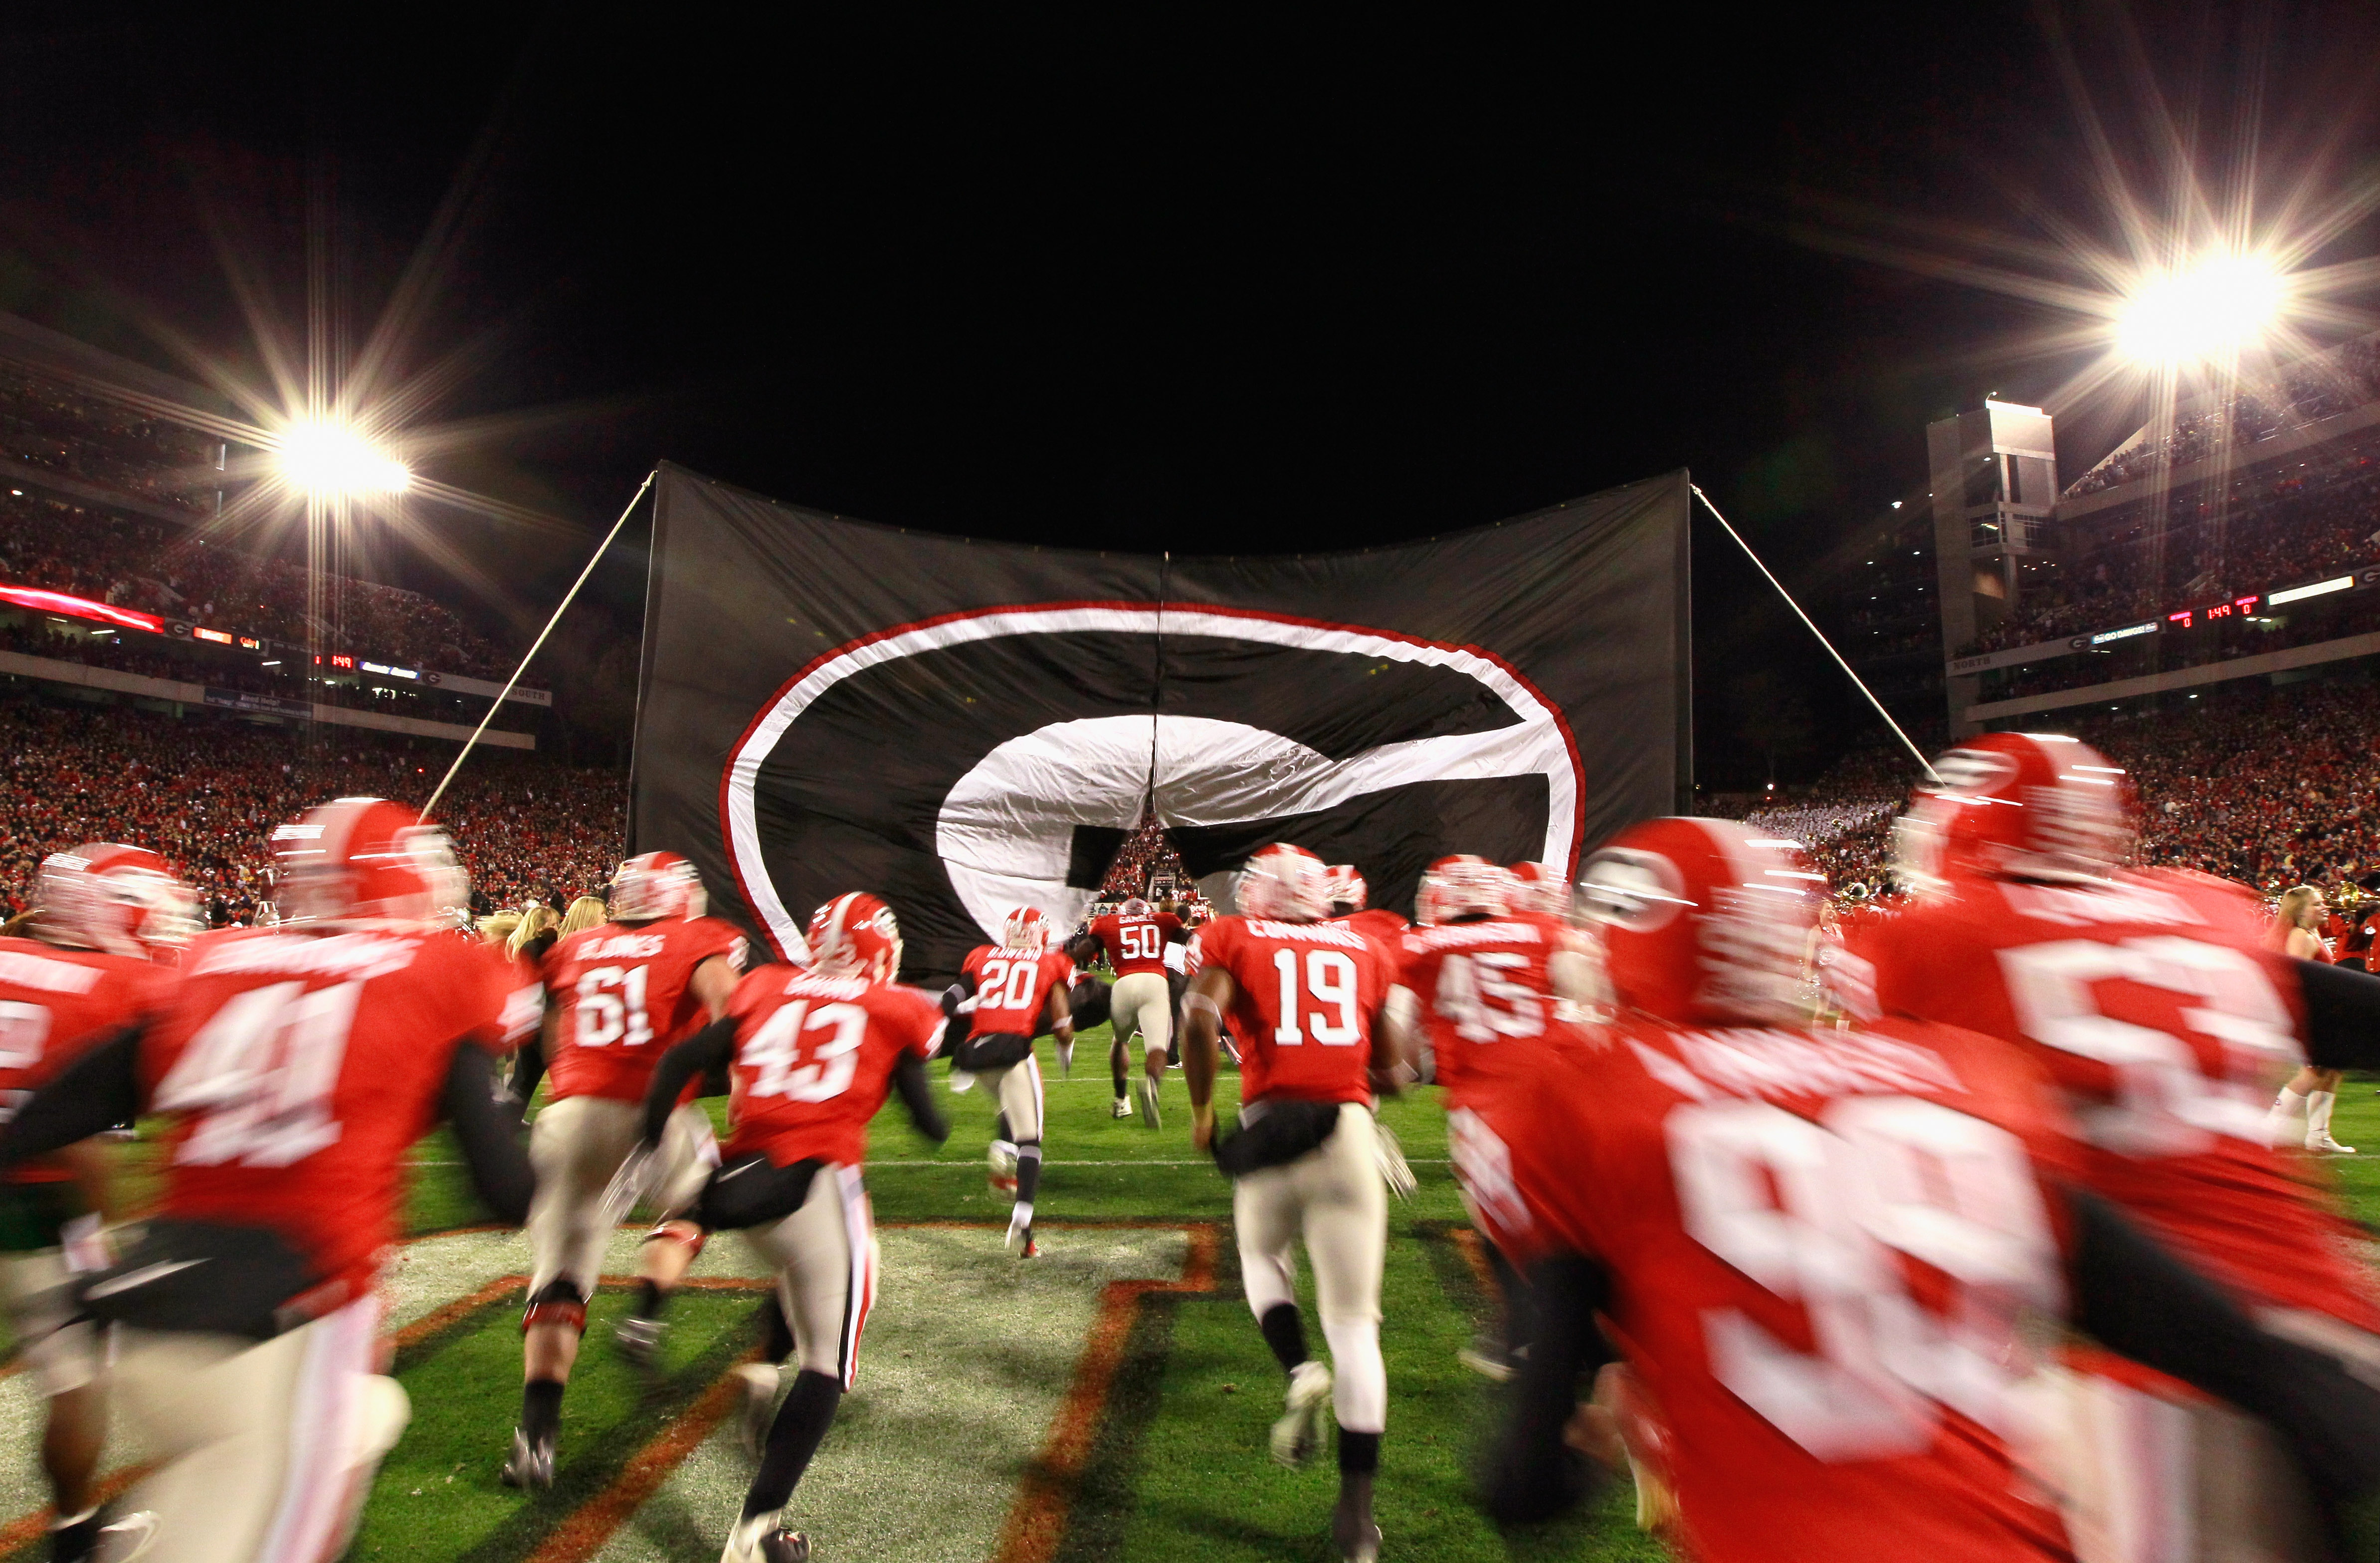 ATHENS, GA - NOVEMBER 27:  The Georgia Bulldogs enter the field to face the Georgia Tech Yellow Jackets at Sanford Stadium on November 27, 2010 in Athens, Georgia.  (Photo by Kevin C. Cox/Getty Images)